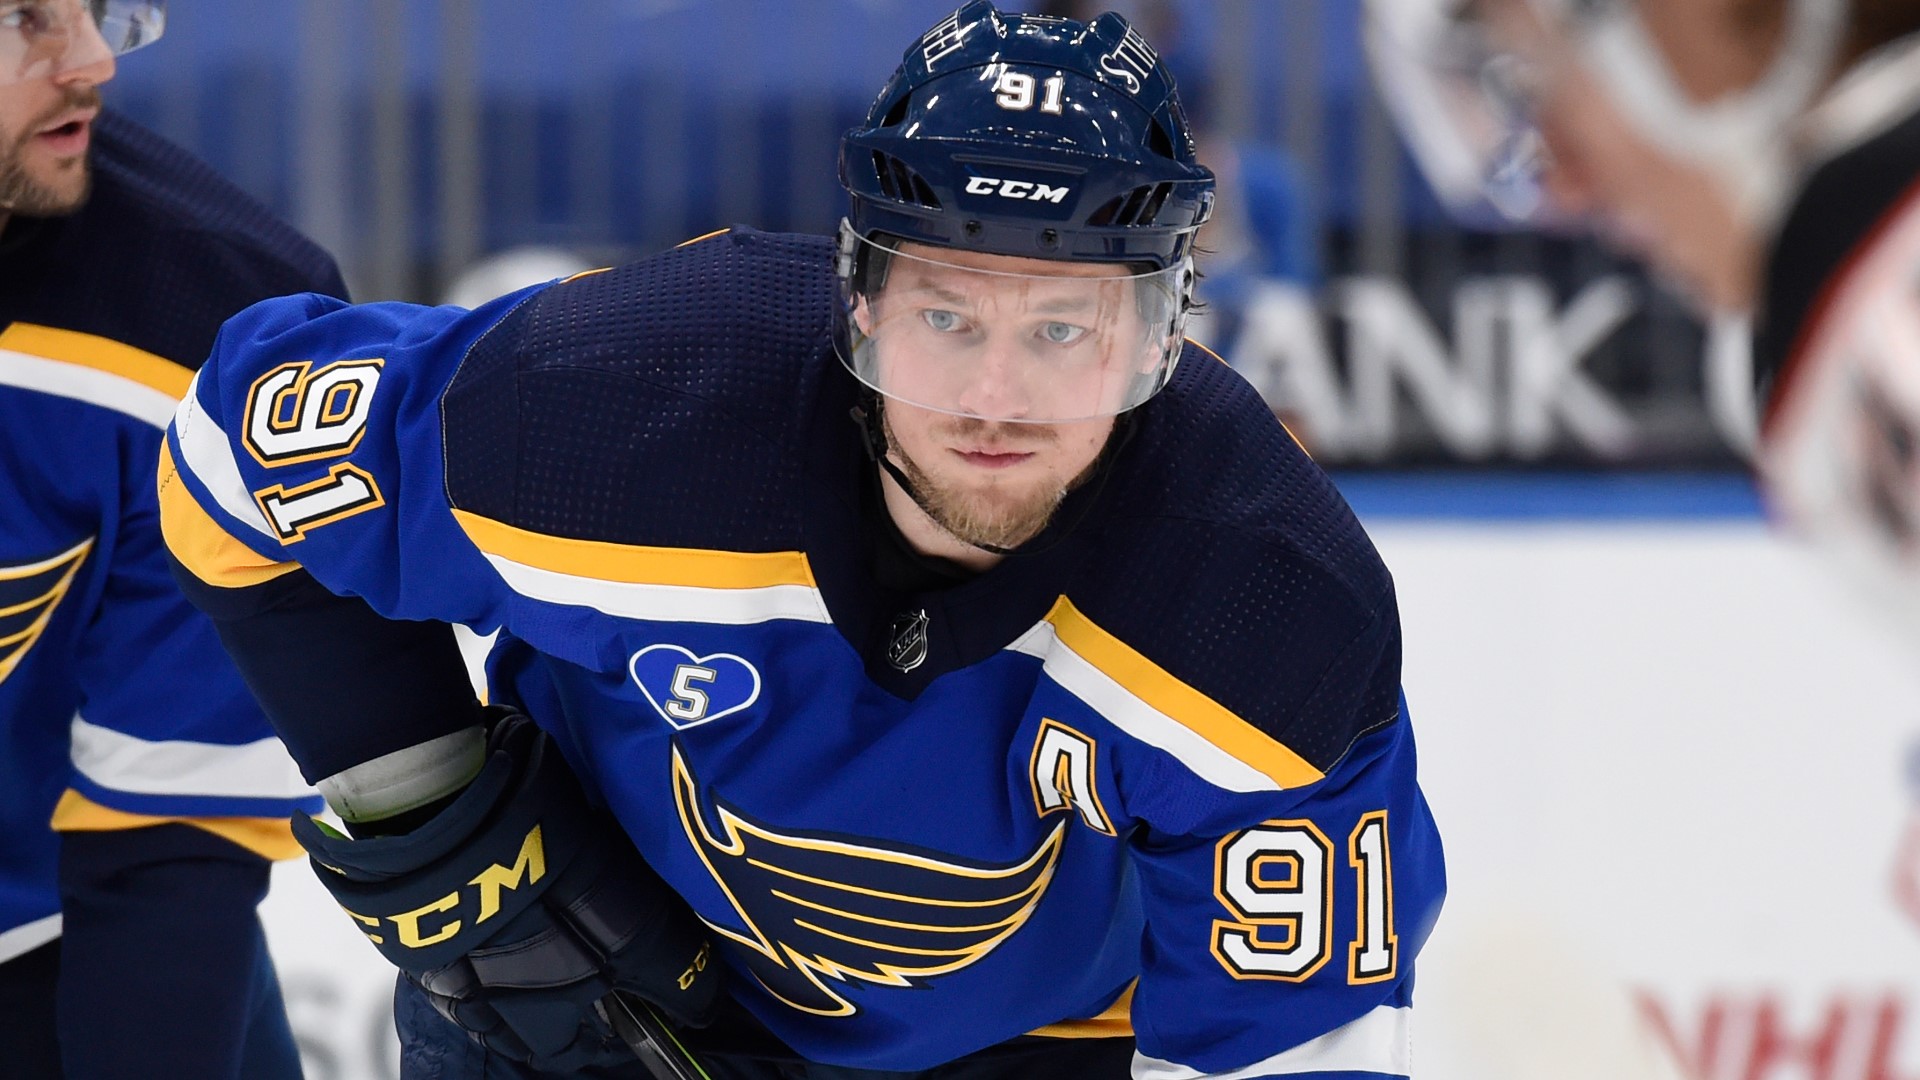 Tarasenko has played just 34 games due to injuries. In that time, he's scored seven goals